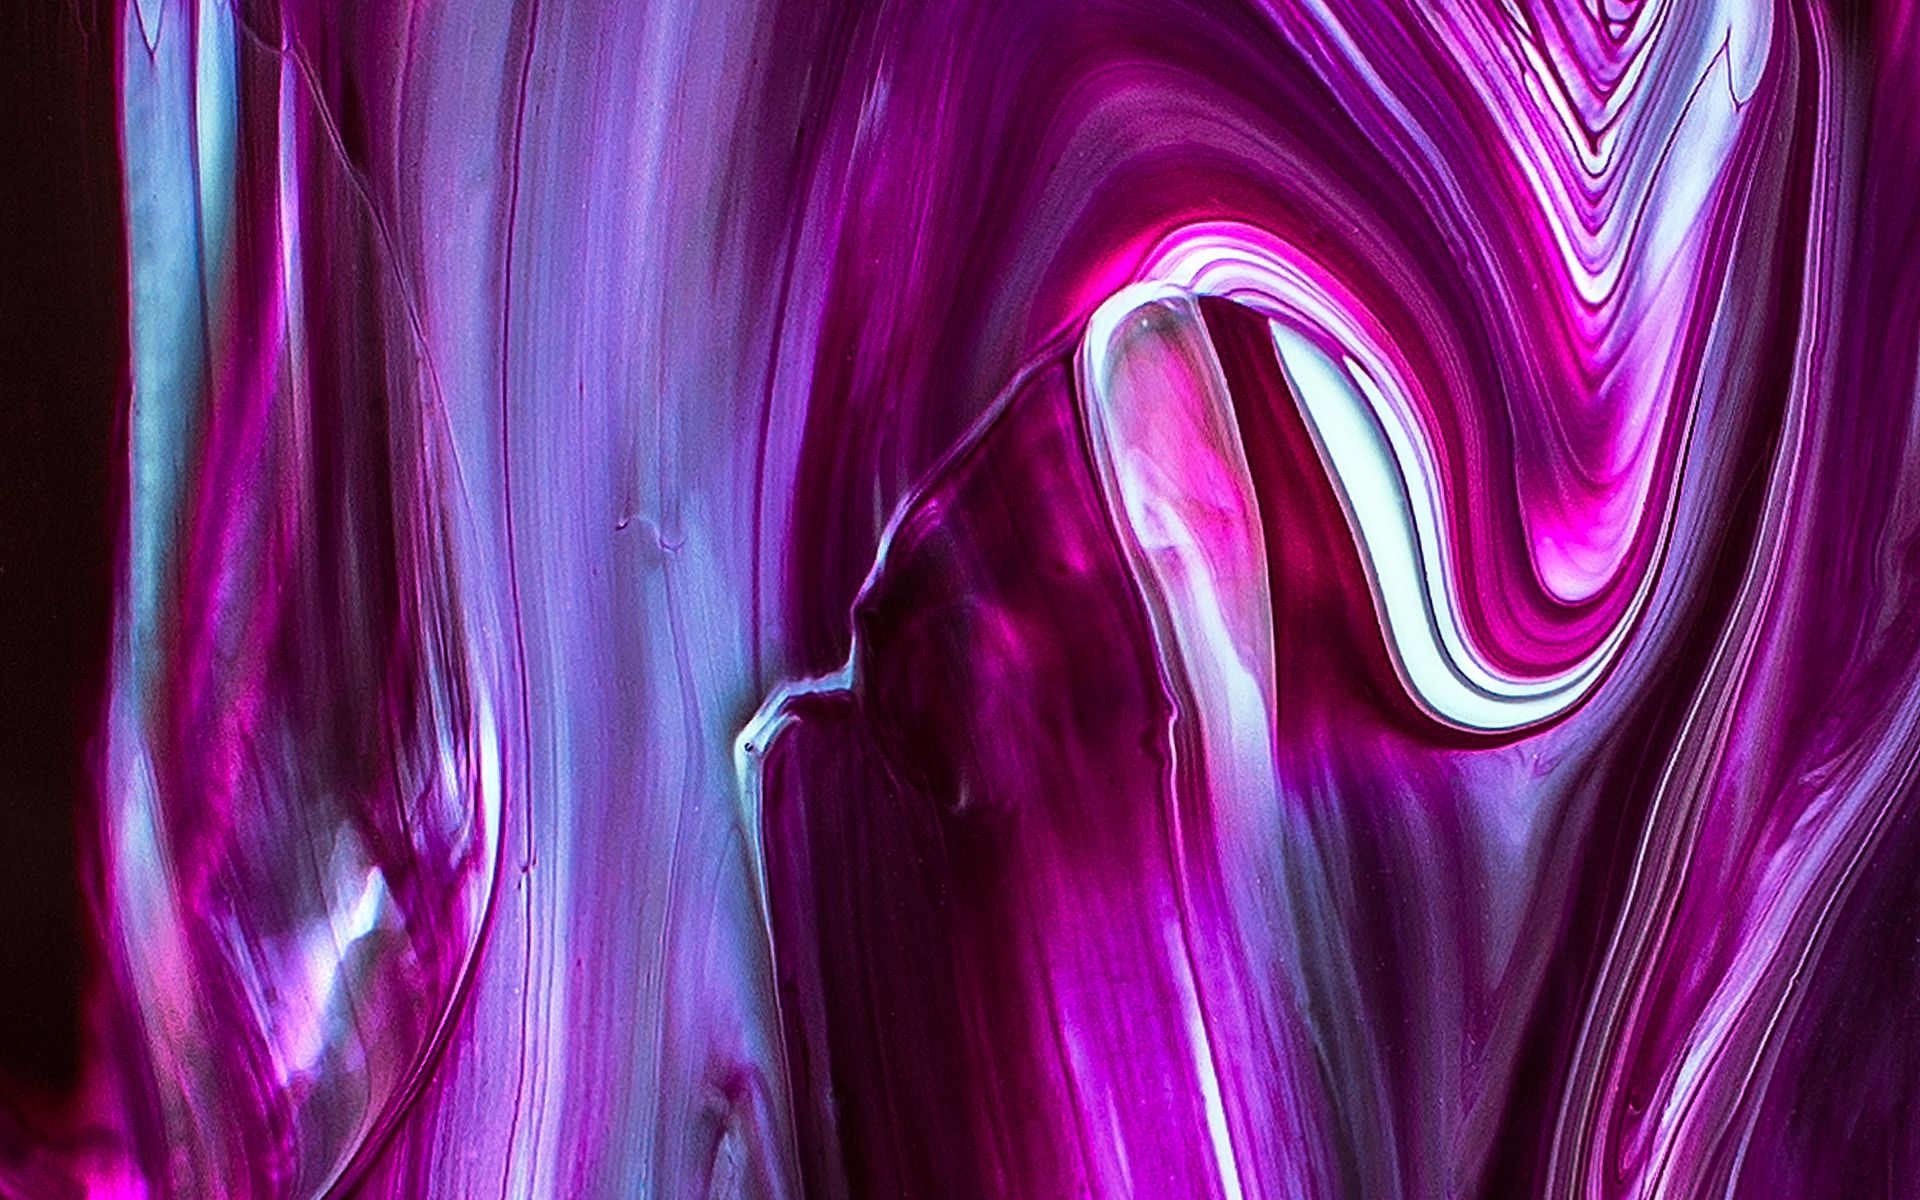 Download wallpaper 1920x1200 paint, drips, lines, lilac, bright ...